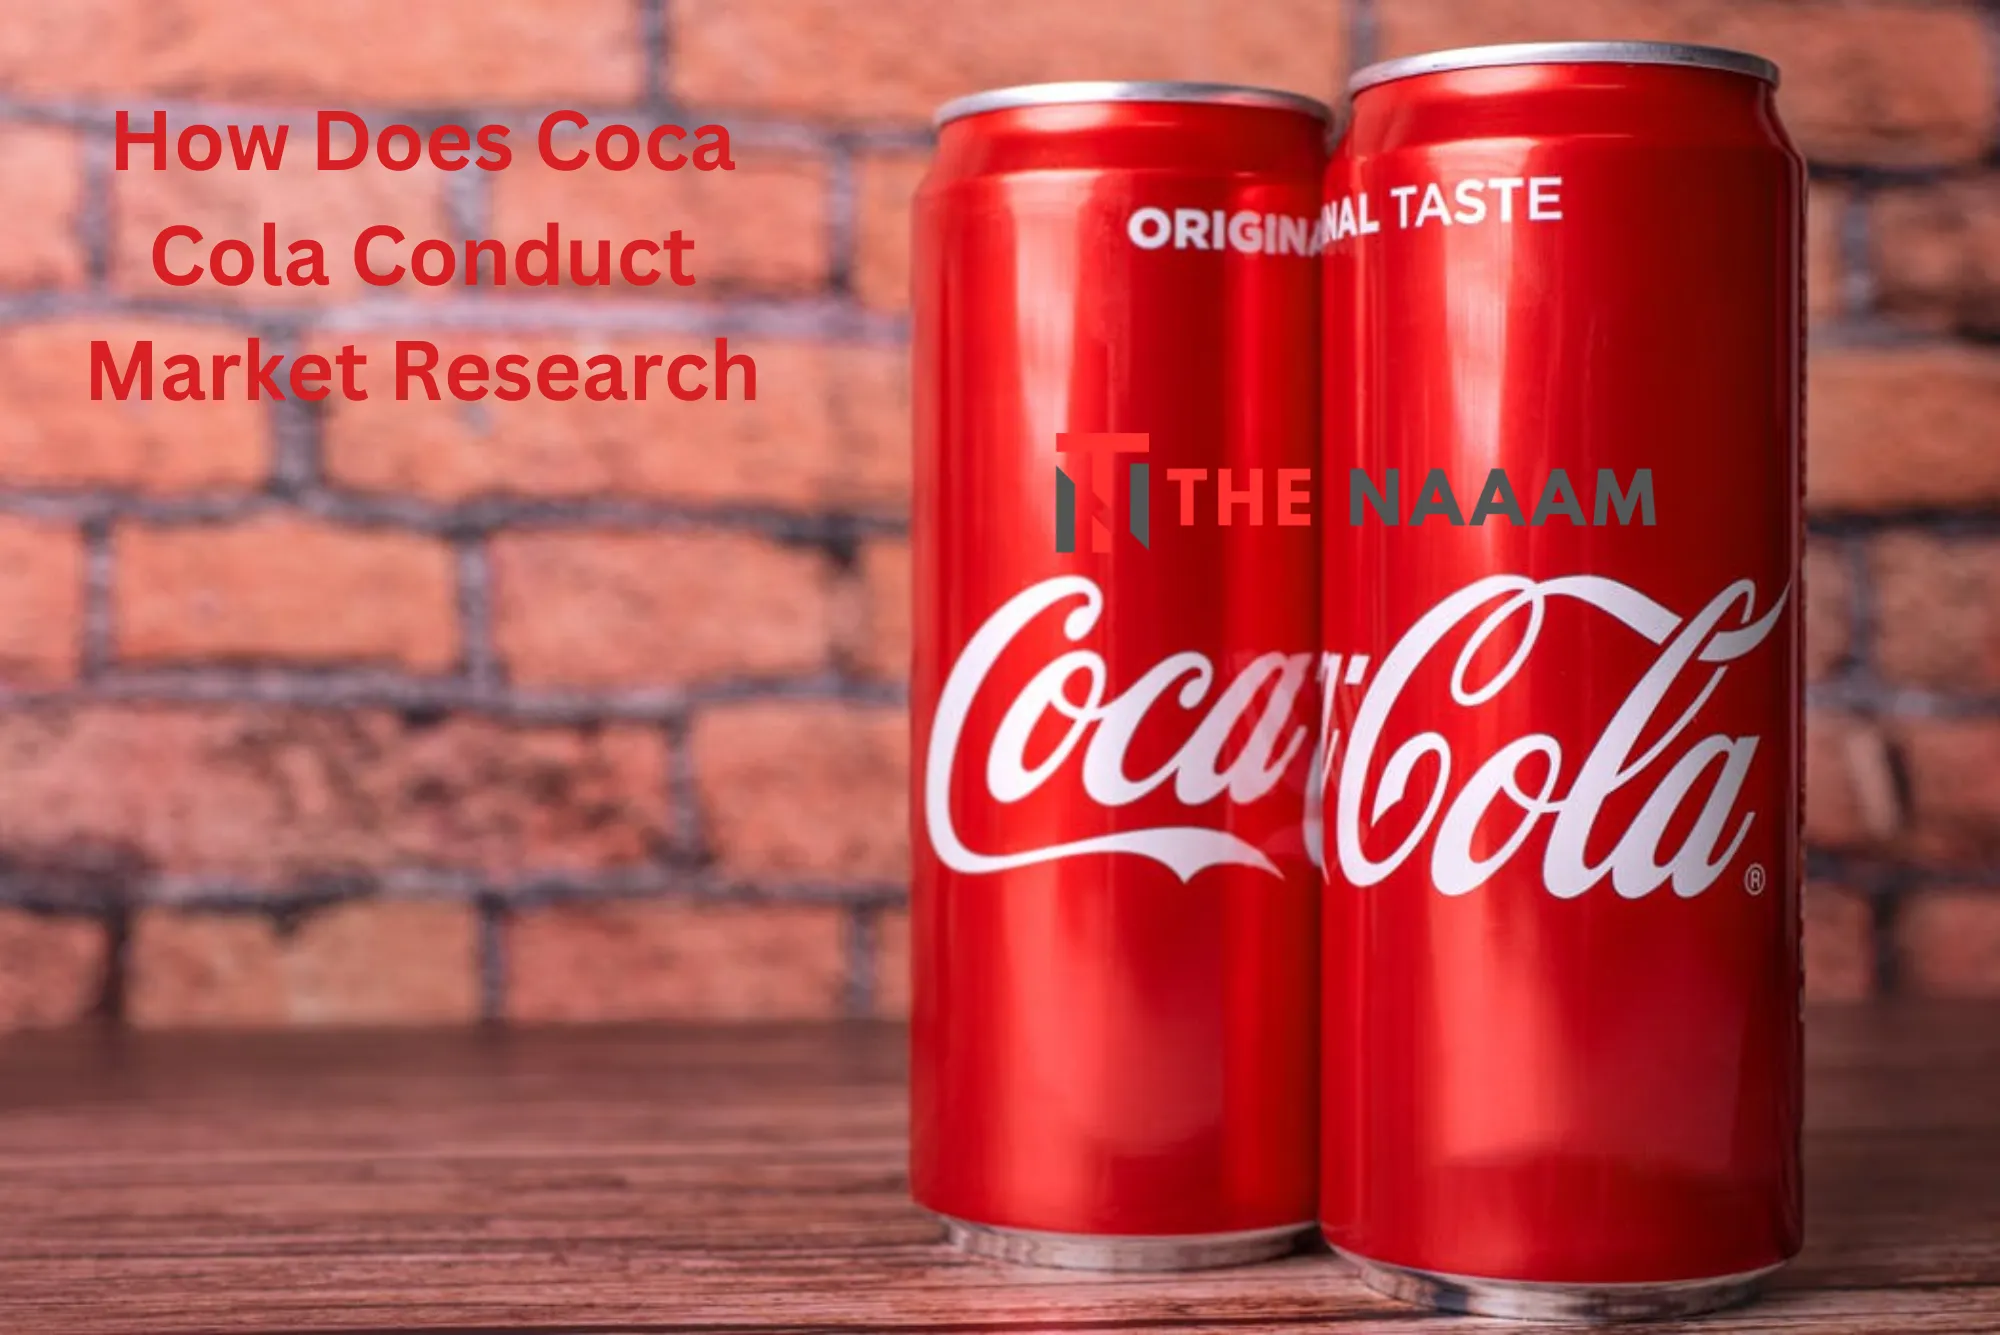 How Does Coca Cola Conduct Market Research